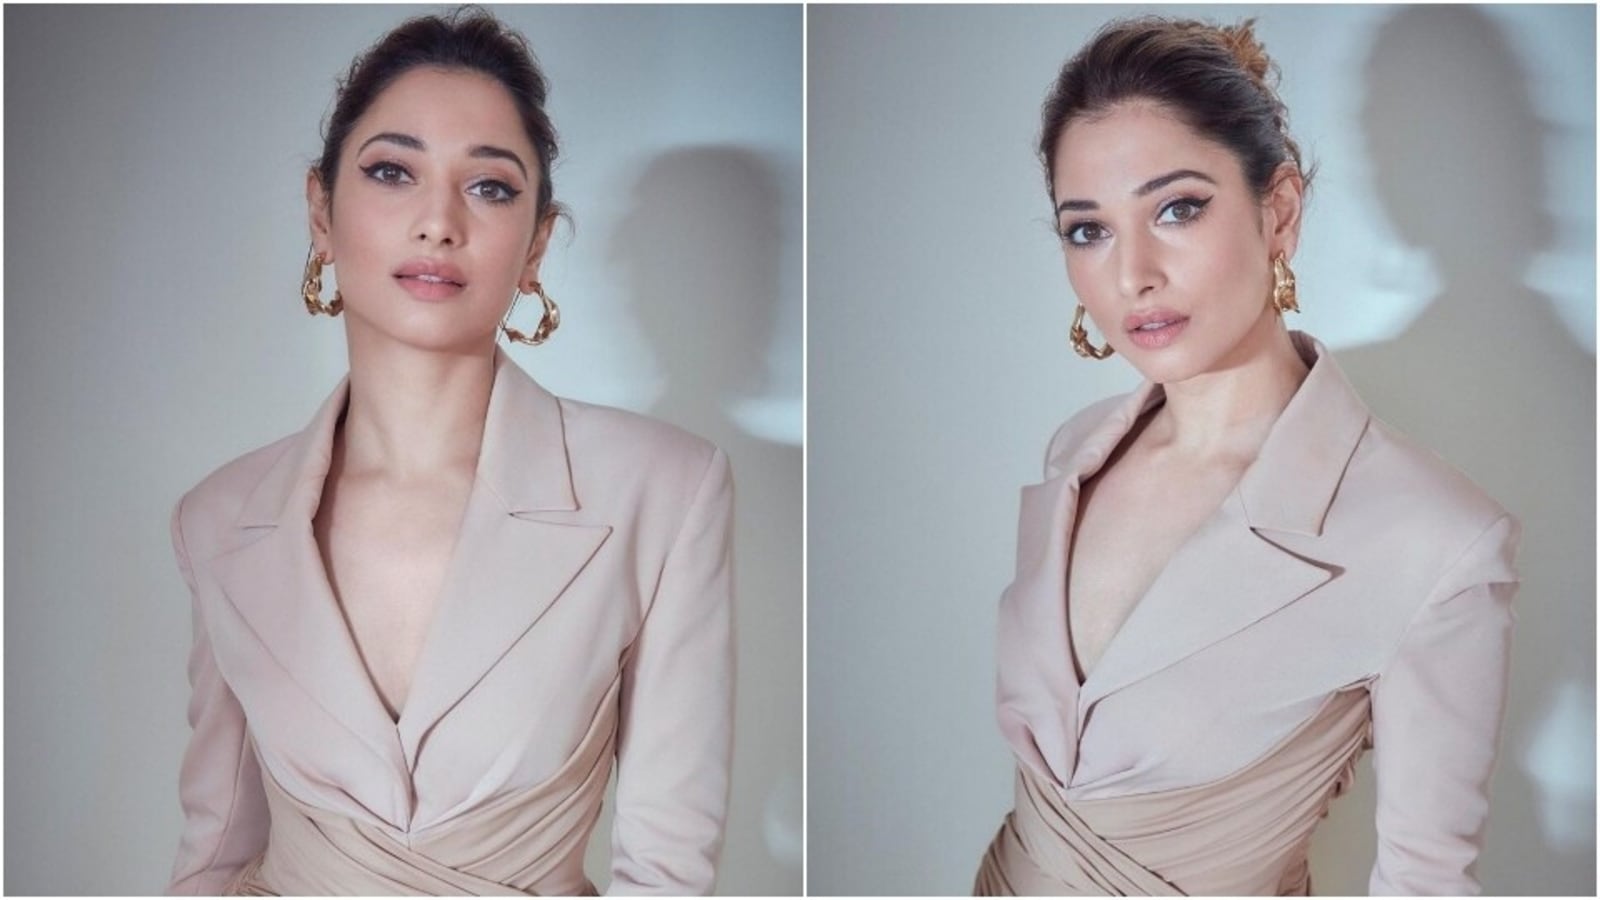 Tamannaah Bhatia In ₹94k Nude Pink Blazer Costume Stuns Together With